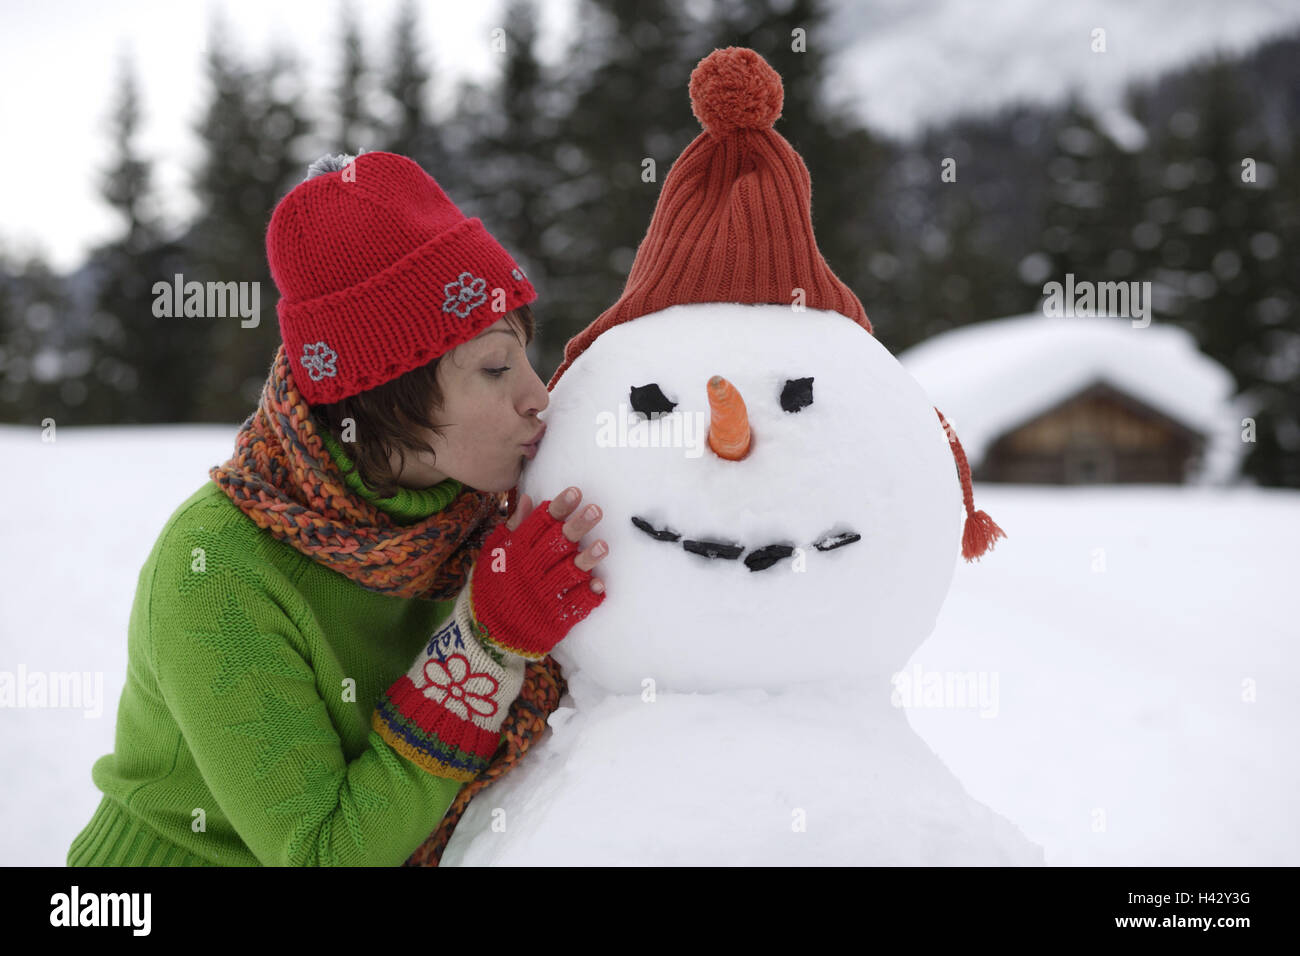 Woman, smiles, snowman, embrace,  kisses, portrait  Series, women portrait, 20-30 years, young, nicely, sympathetically, snow, vacation, leisure time, fun, zest for life, happiness, clothing, winter clothing, cap, scarf, snow fun, in the winter passport, outside, winters, happily, affection, kiss Stock Photo